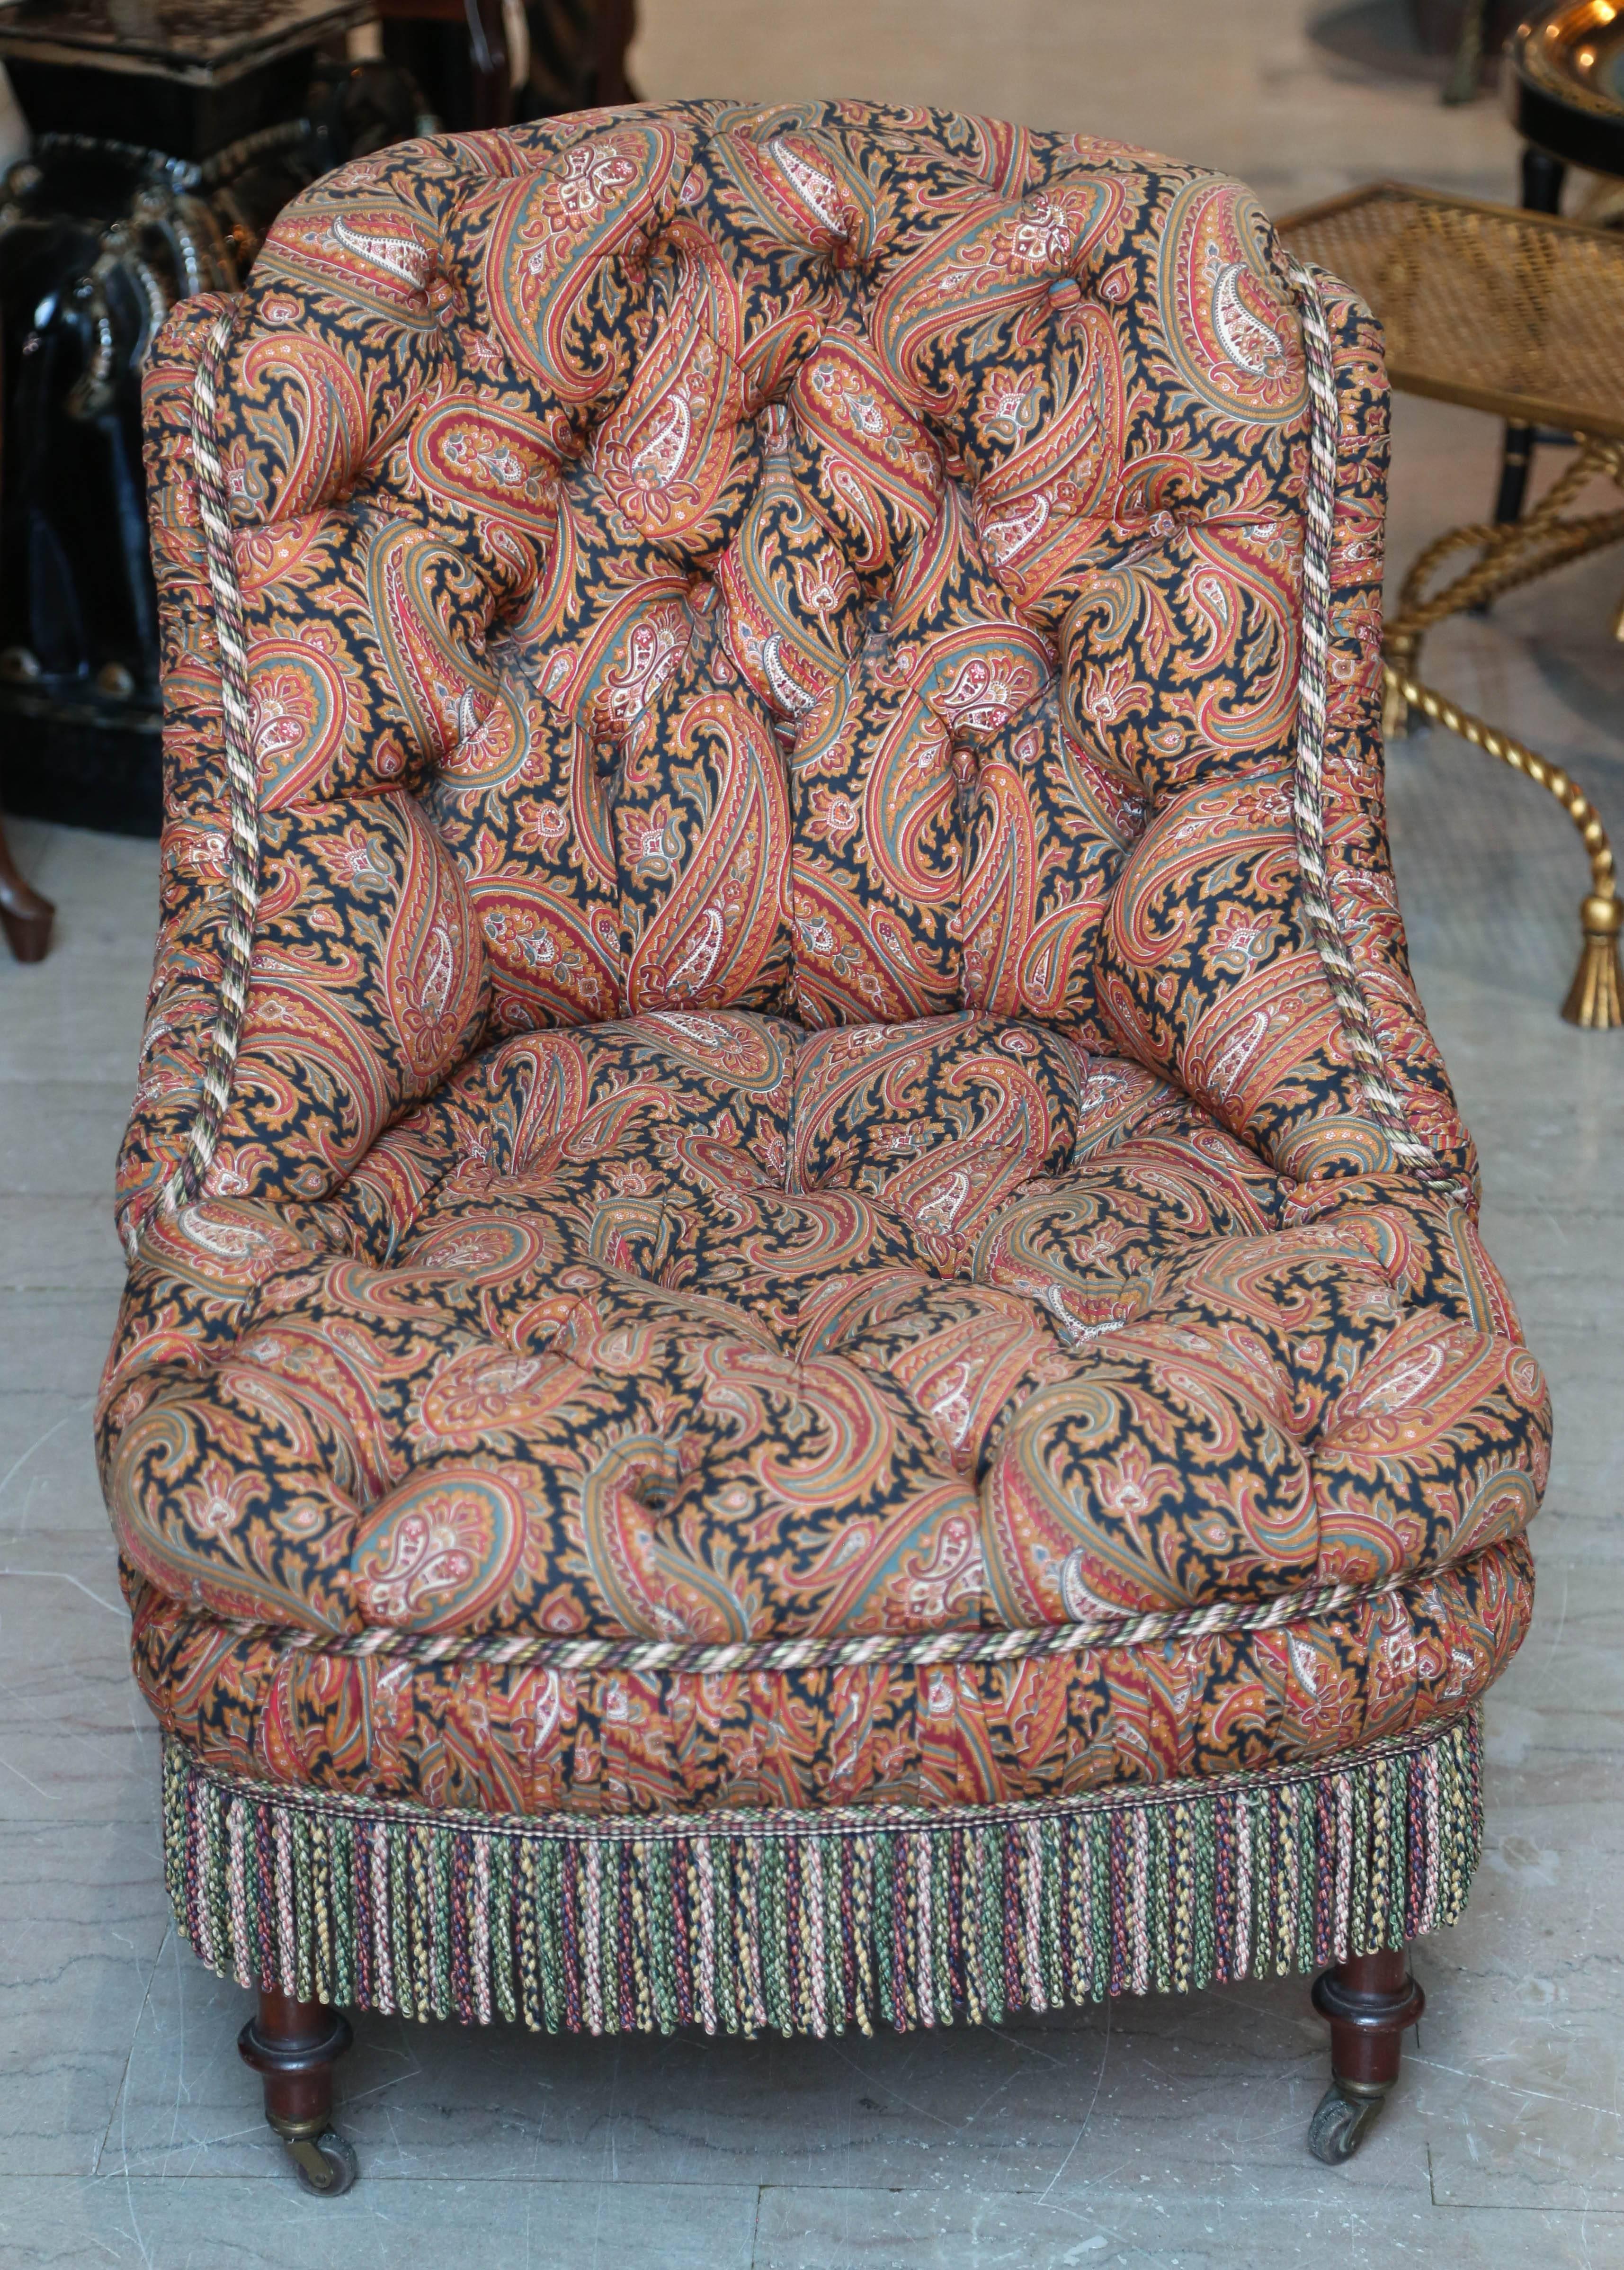 Comfortable 19th century English chair covered in a fine paisley fabric.